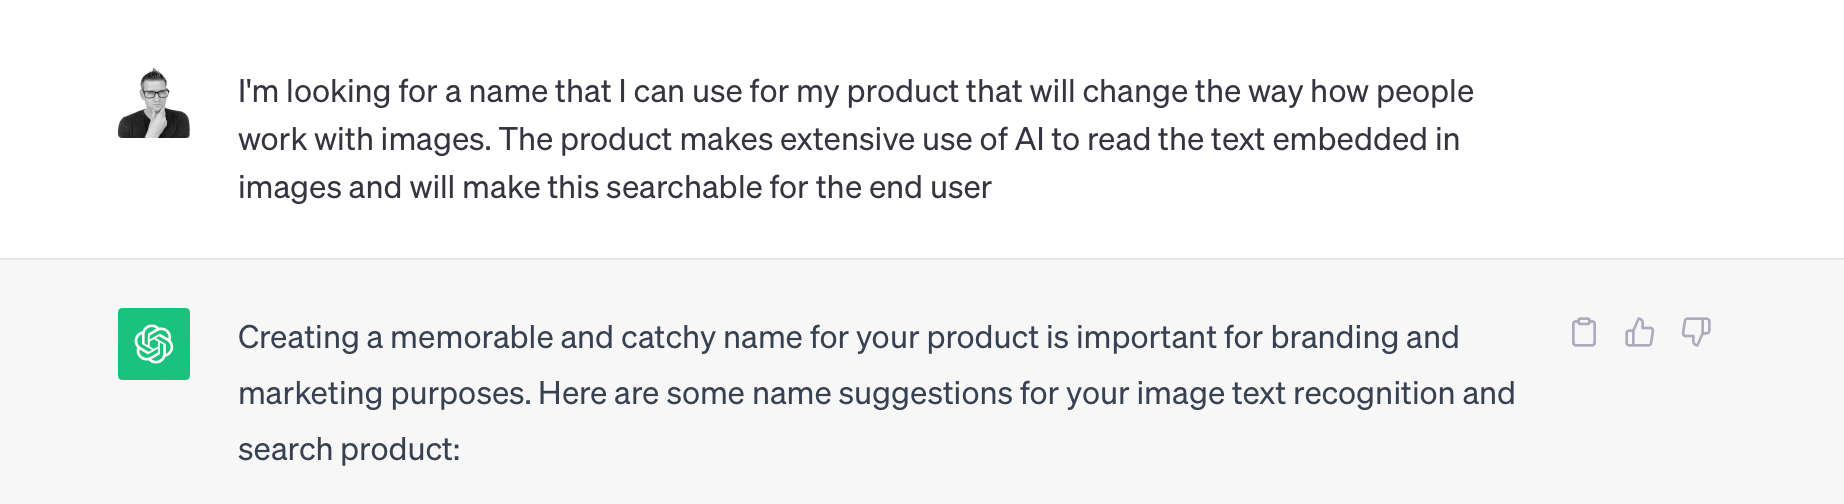 Prompt in ChatGPT, asking "I'm looking for a name that I can use for my product that will change the way how people work with images. The product makes extensive use of AI to read the text embedded in images and will make this searchable for the end user"